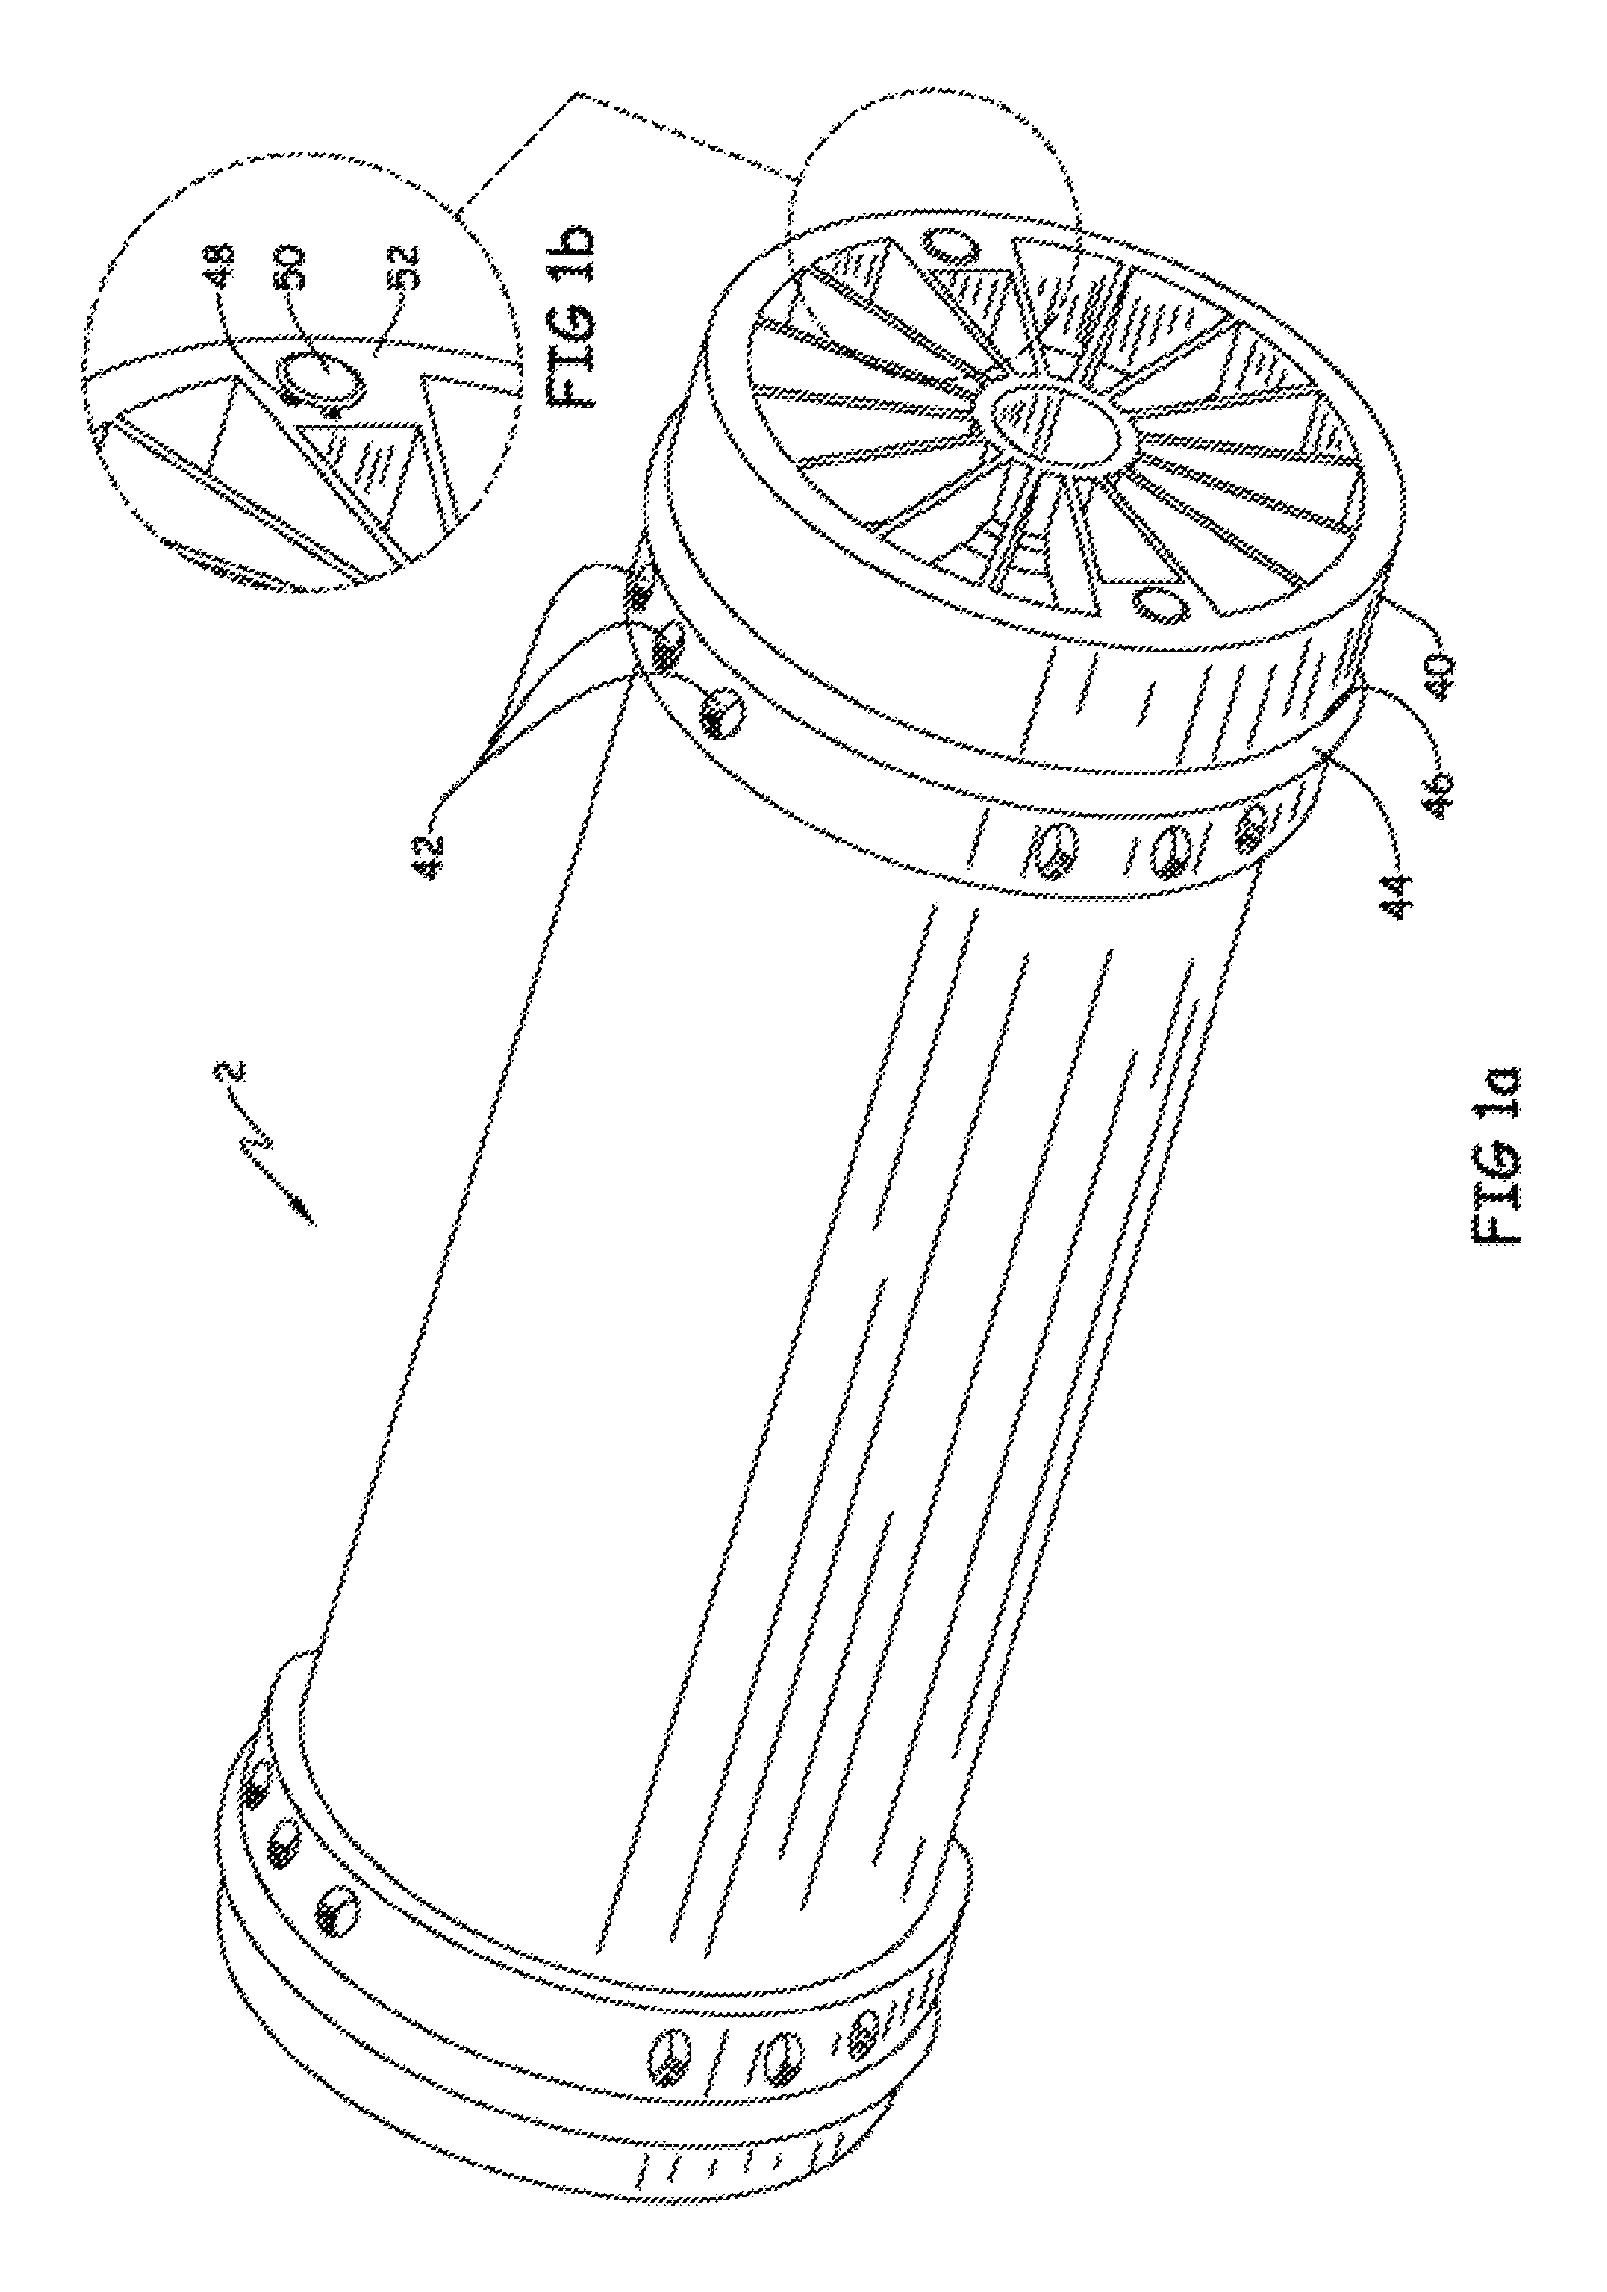 Spiral wound element and seal assembly